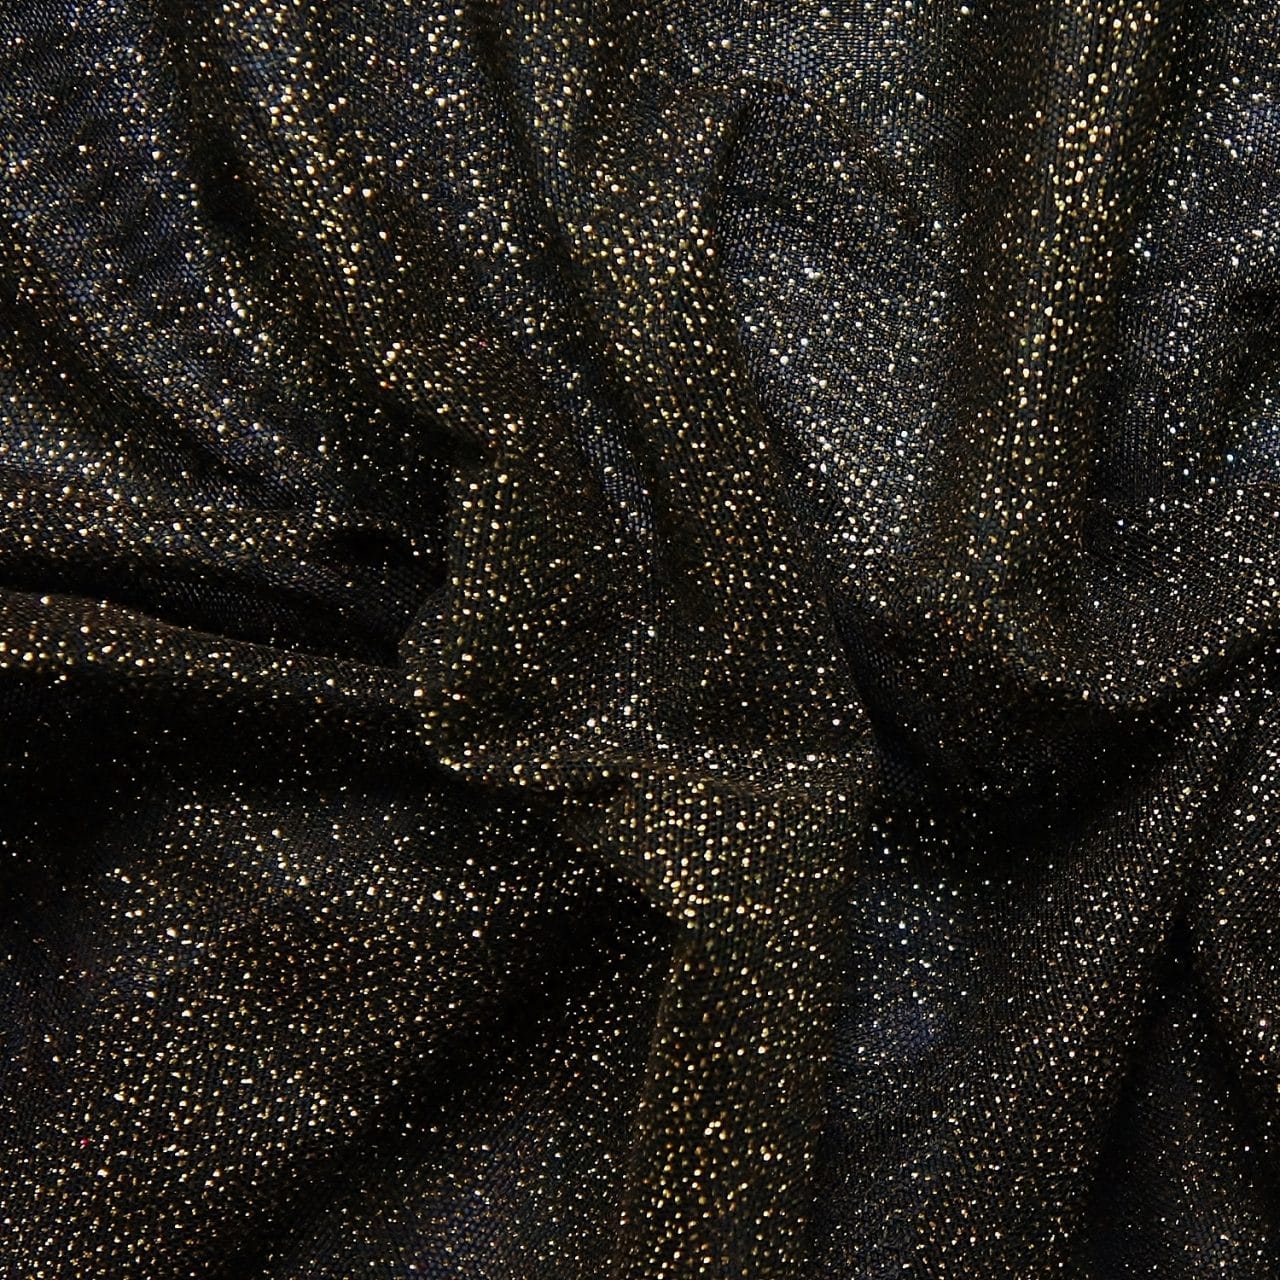 Black Gold Glitter Mesh fabric features all over gold glitter on 2-way stretch black polyester mesh making it ideal for both semi-fitted and draped garments.